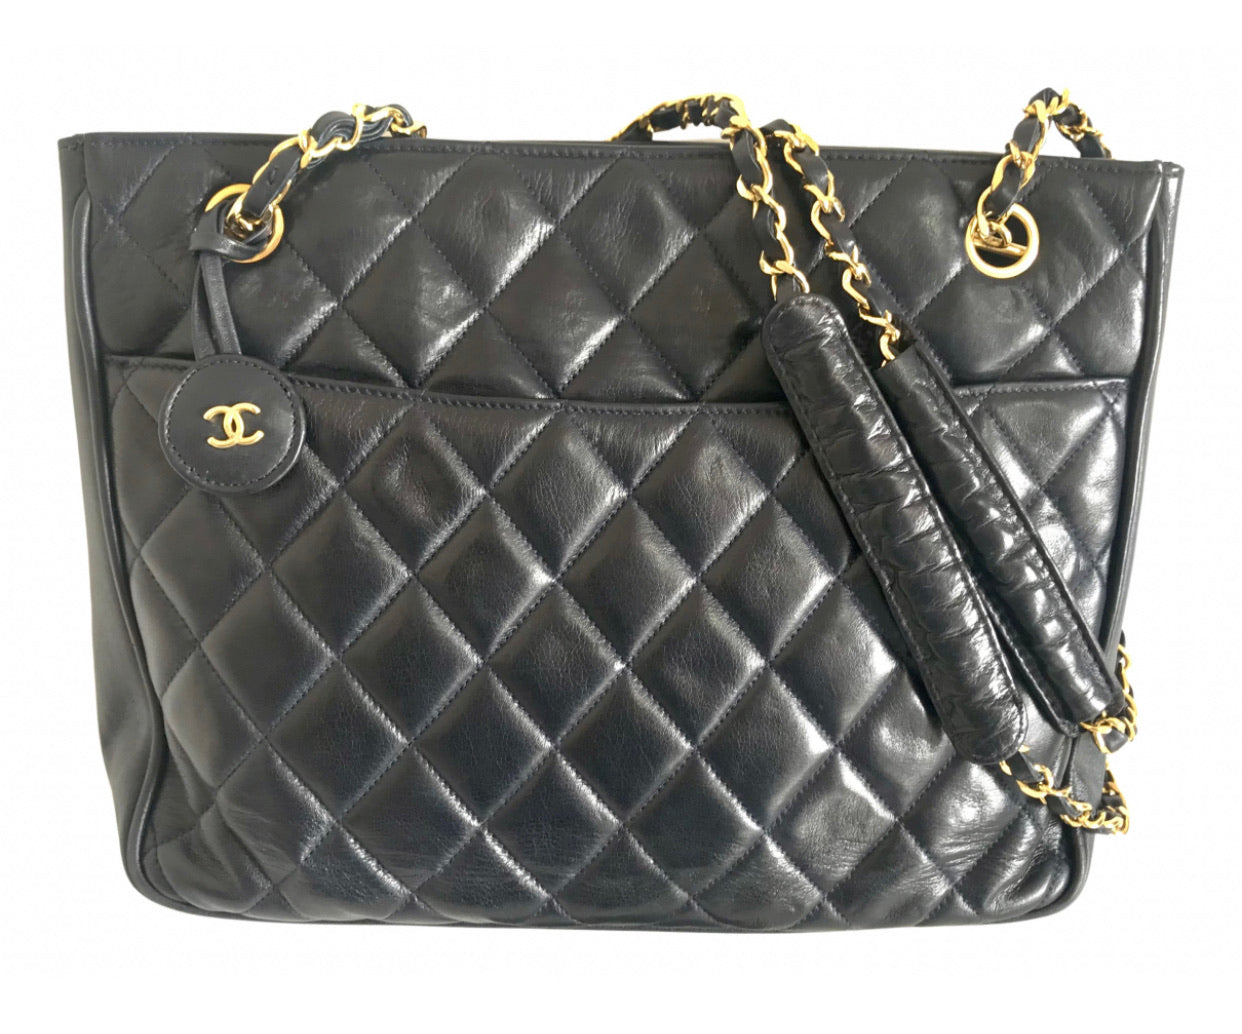 Chanel Vintage Chanel Navy Quilted Leather Shoulder Bag With Leather